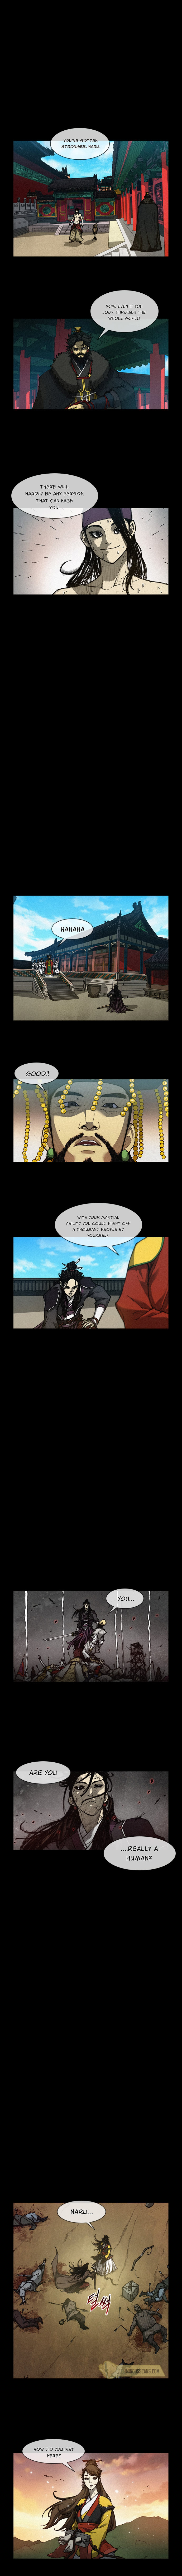 Long Way of the Warrior Chapter 6 - Page 2